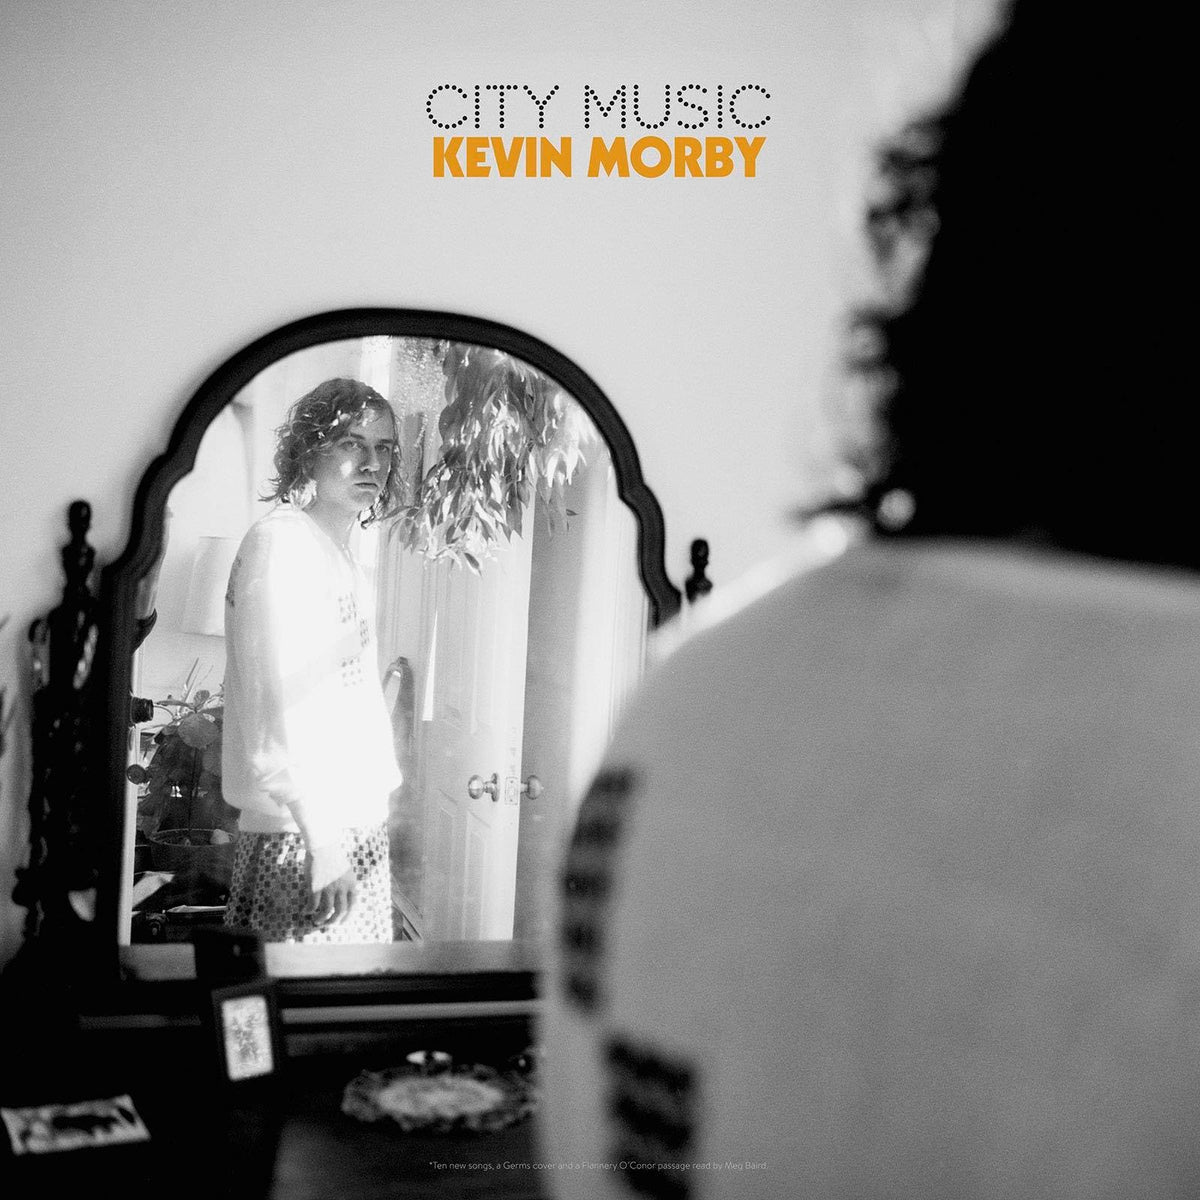 Interview with Kevin Morby